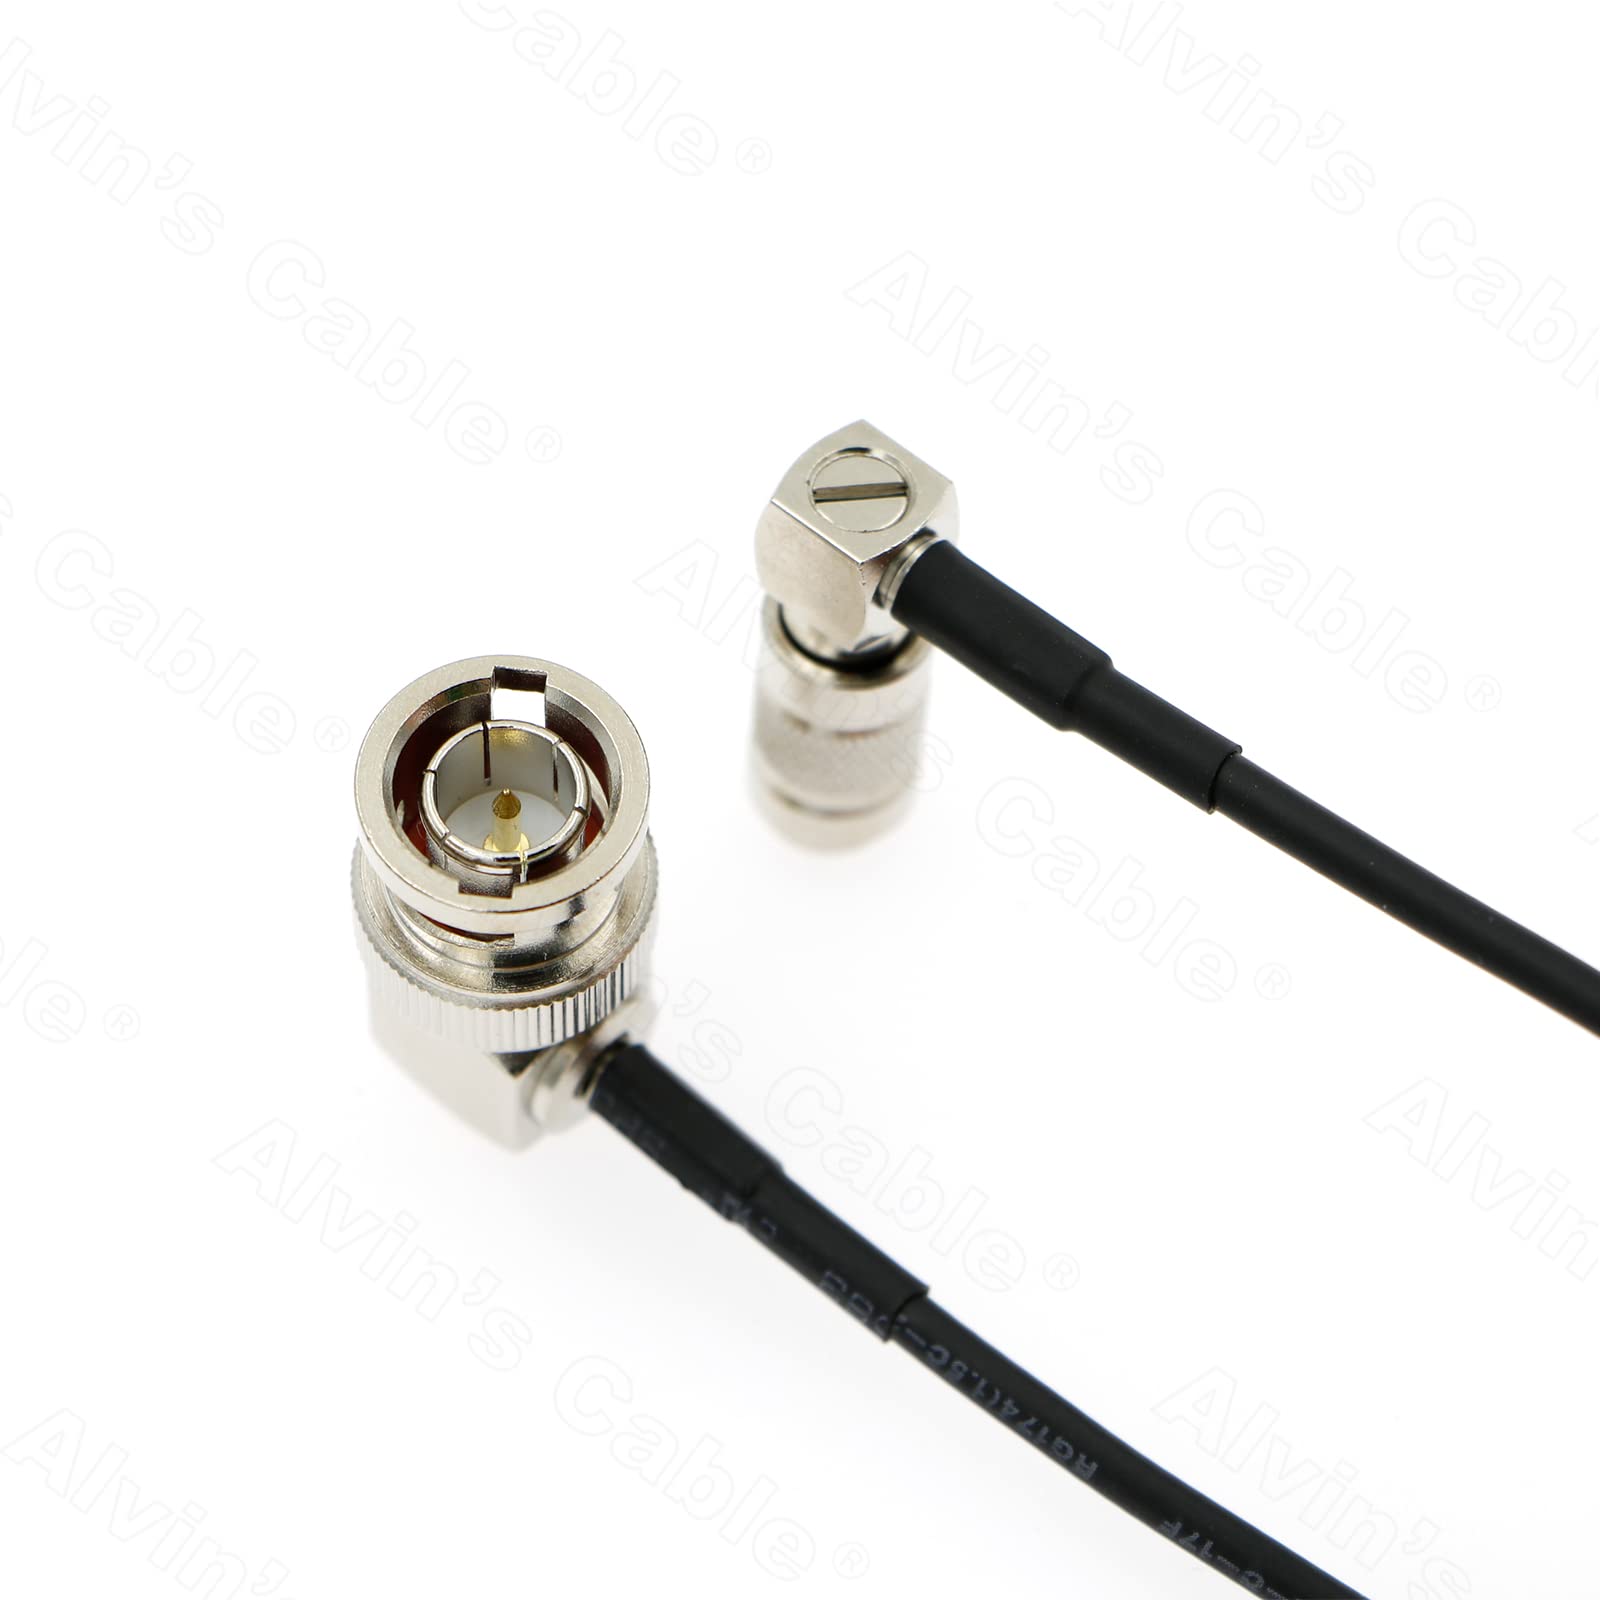 Alvin’s Cables DIN 1.0/2.3 to BNC 3G Coaxial Cable Mini BNC Male to BNC Male RG174 75 Ohm HD SDI Cable for Blackmagic Decklink Quad 60cm|23.6inches